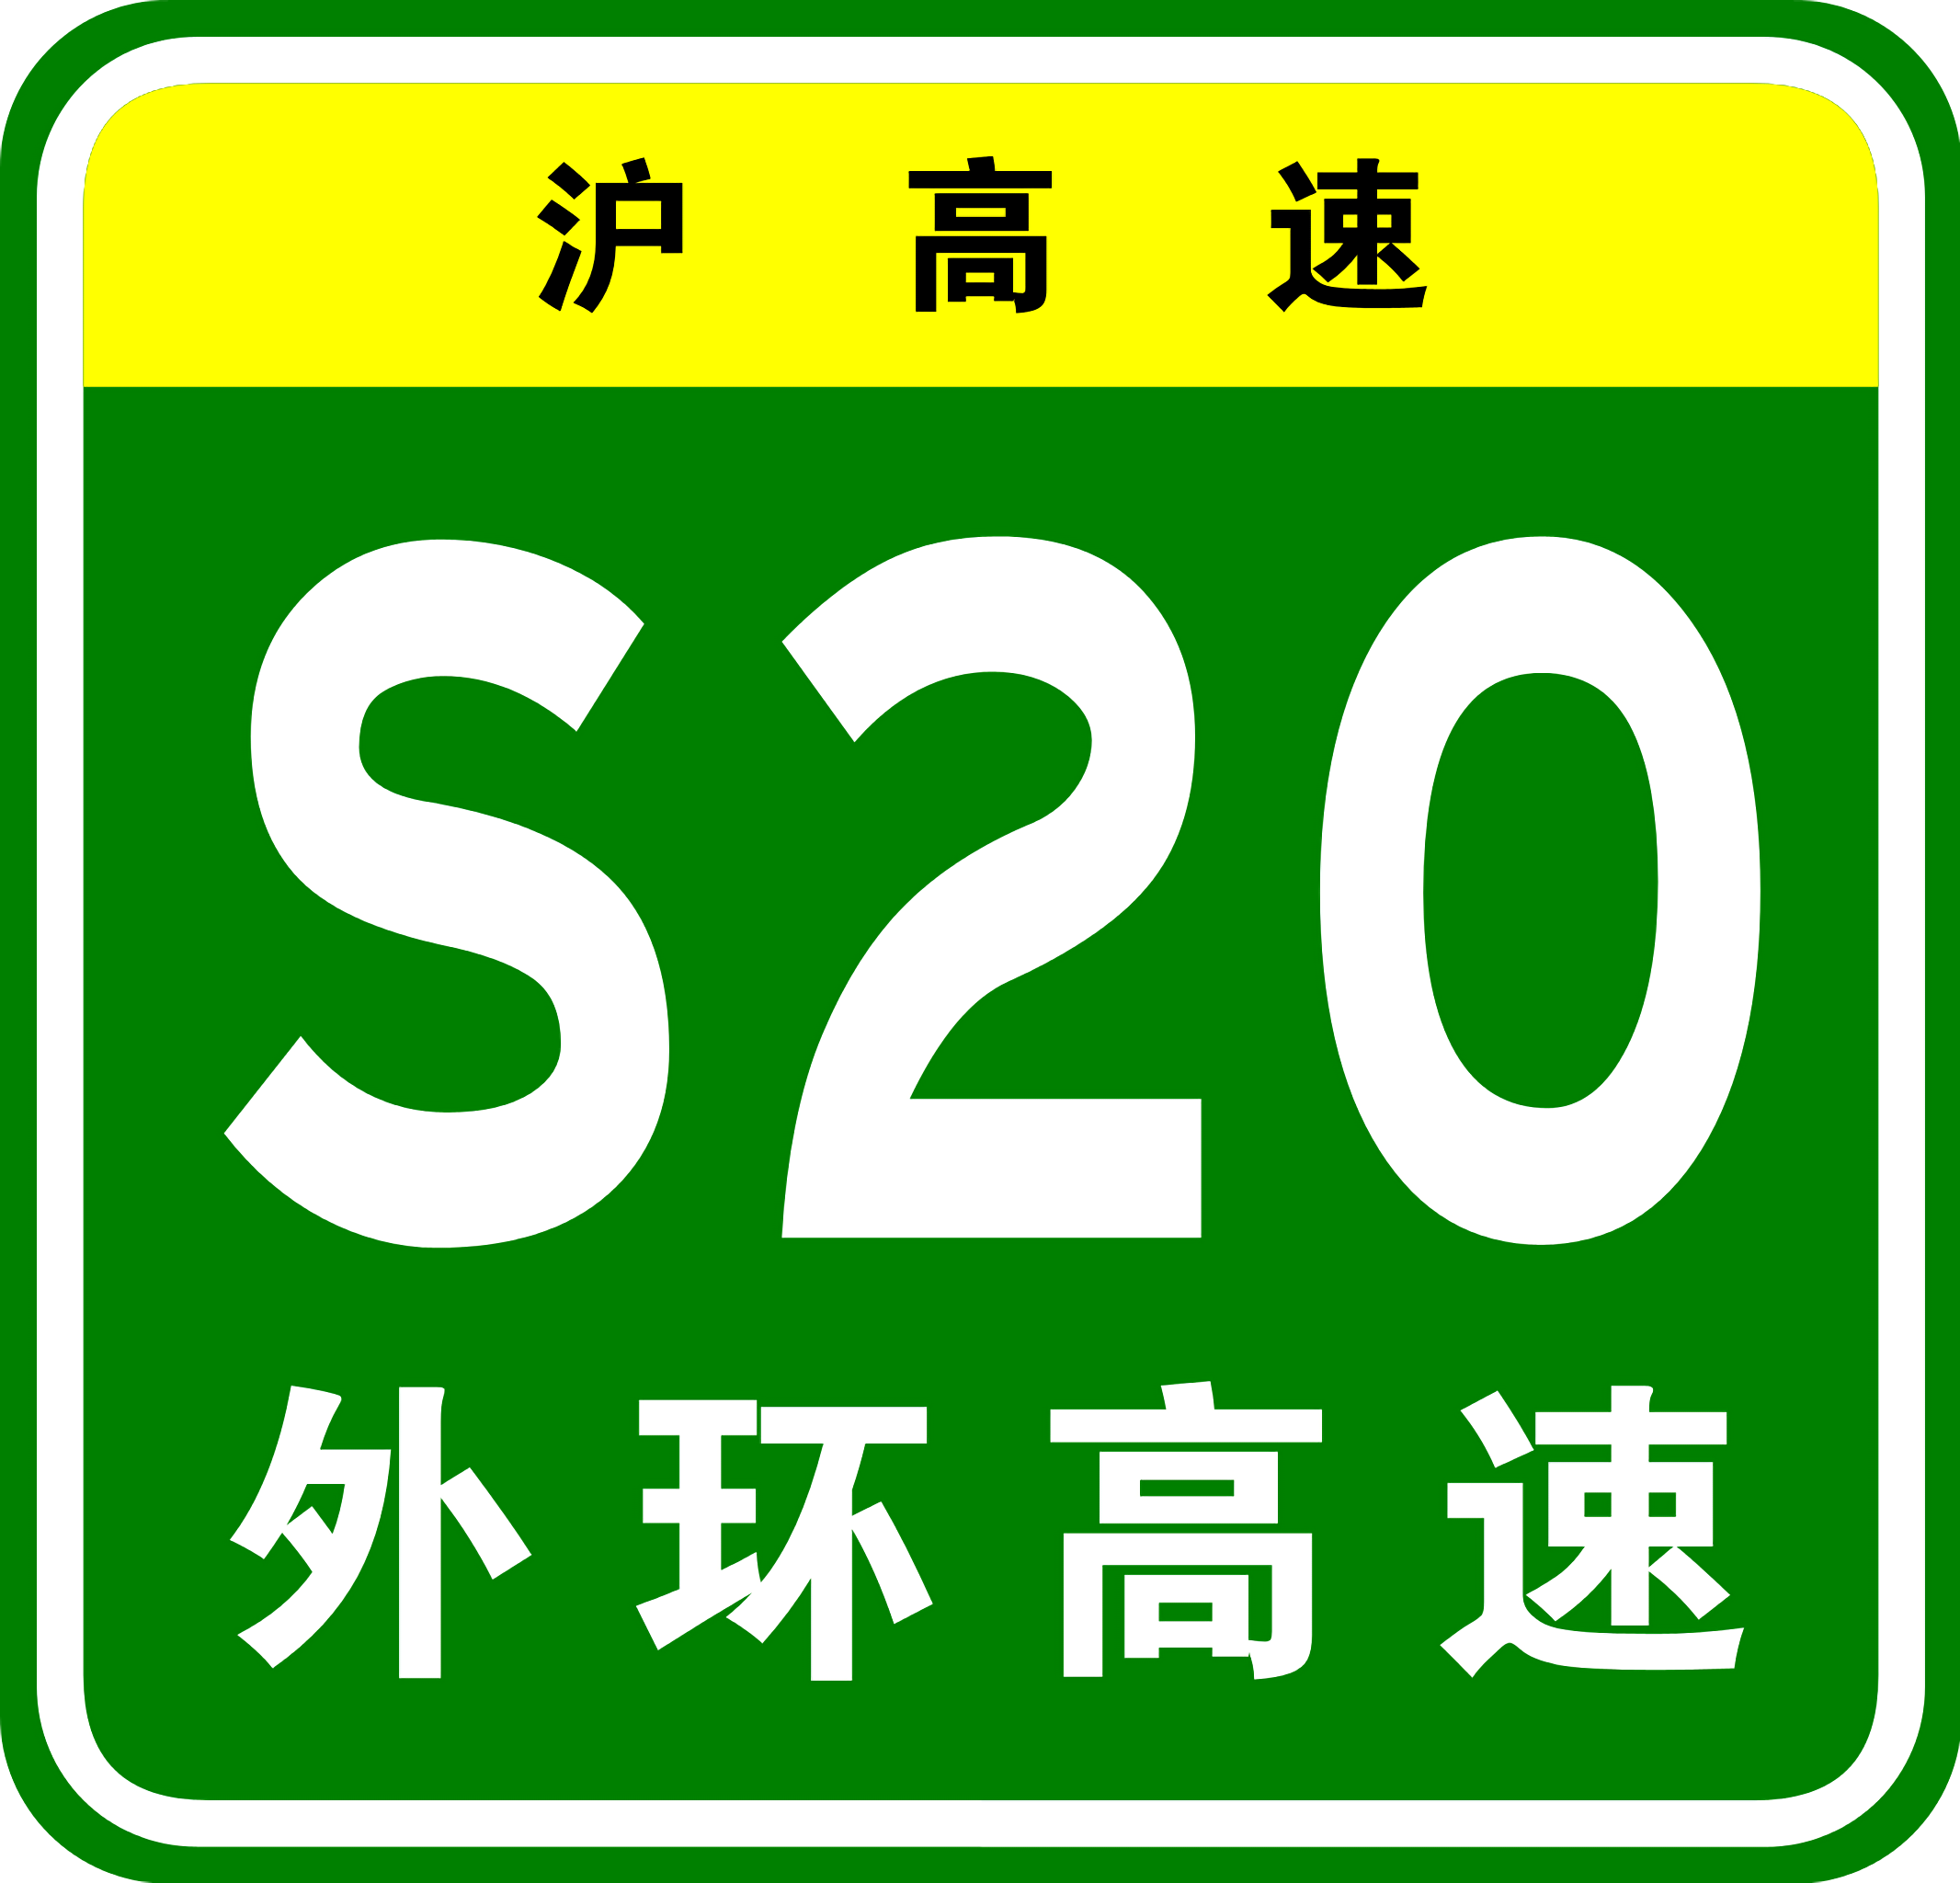 General 2132x2048 sign Asia numbers green yellow